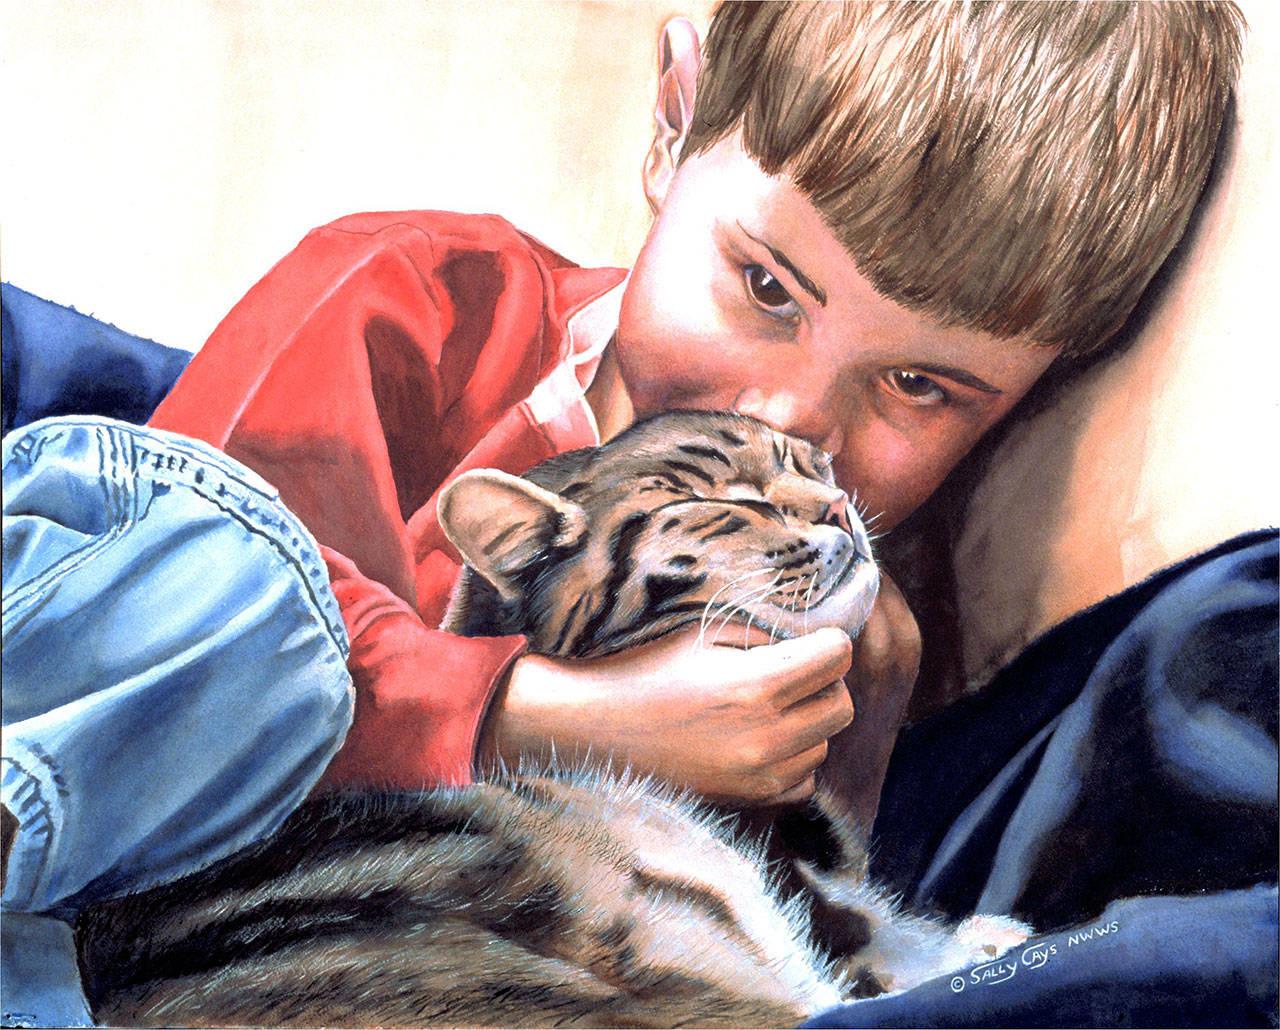 “Adam and Sprocket” by Sally Cays, an artist of the month at Blue Whole Gallery, will be on display this weekend.